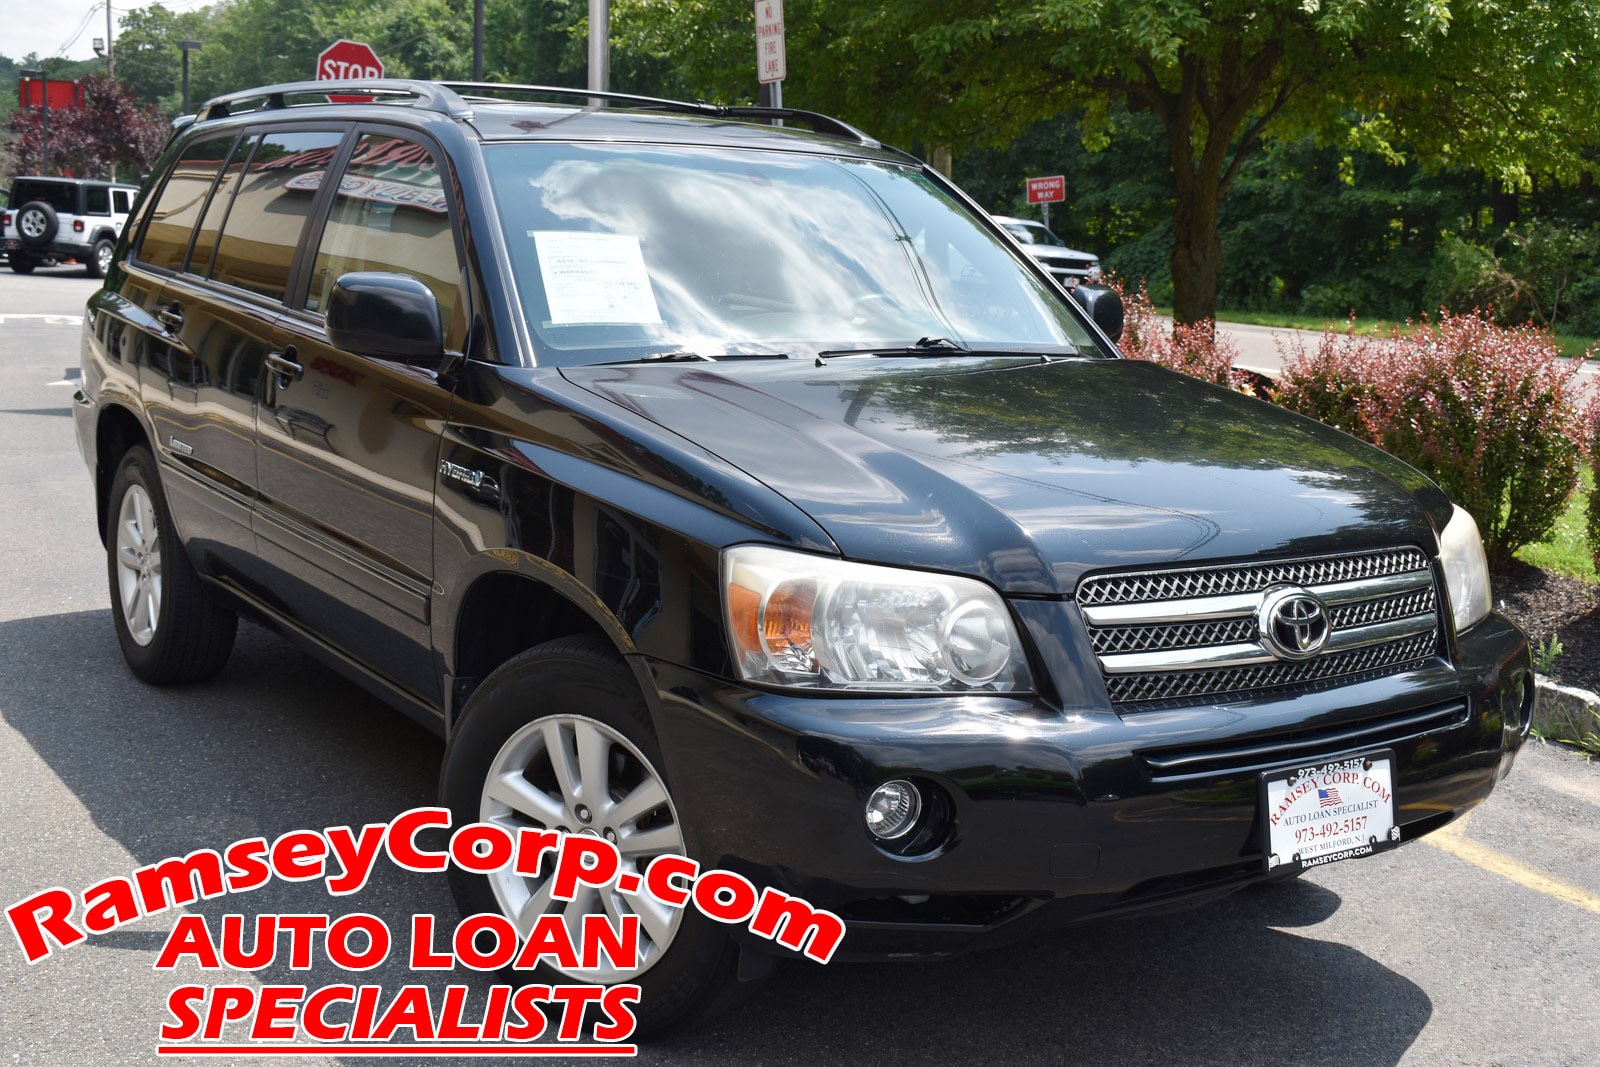 Used 2007 Toyota Highlander Hybrid For Sale at Ramsey Corp. | VIN:  JTEEW21AX70035125